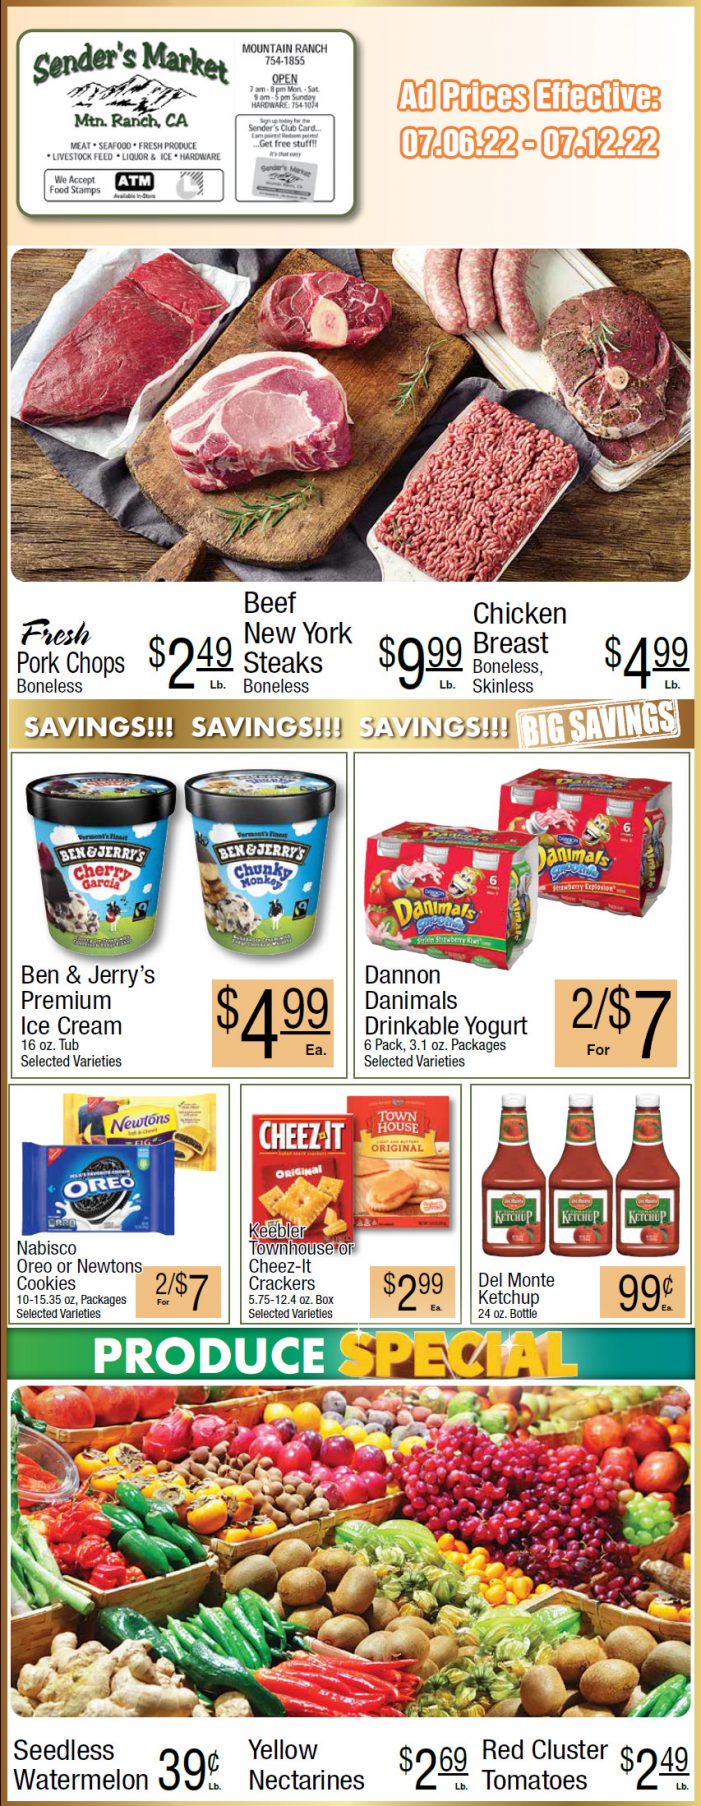 Sender’s Market Weekly Ad & Grocery Specials Through July 12th!  Shop Local & Save!